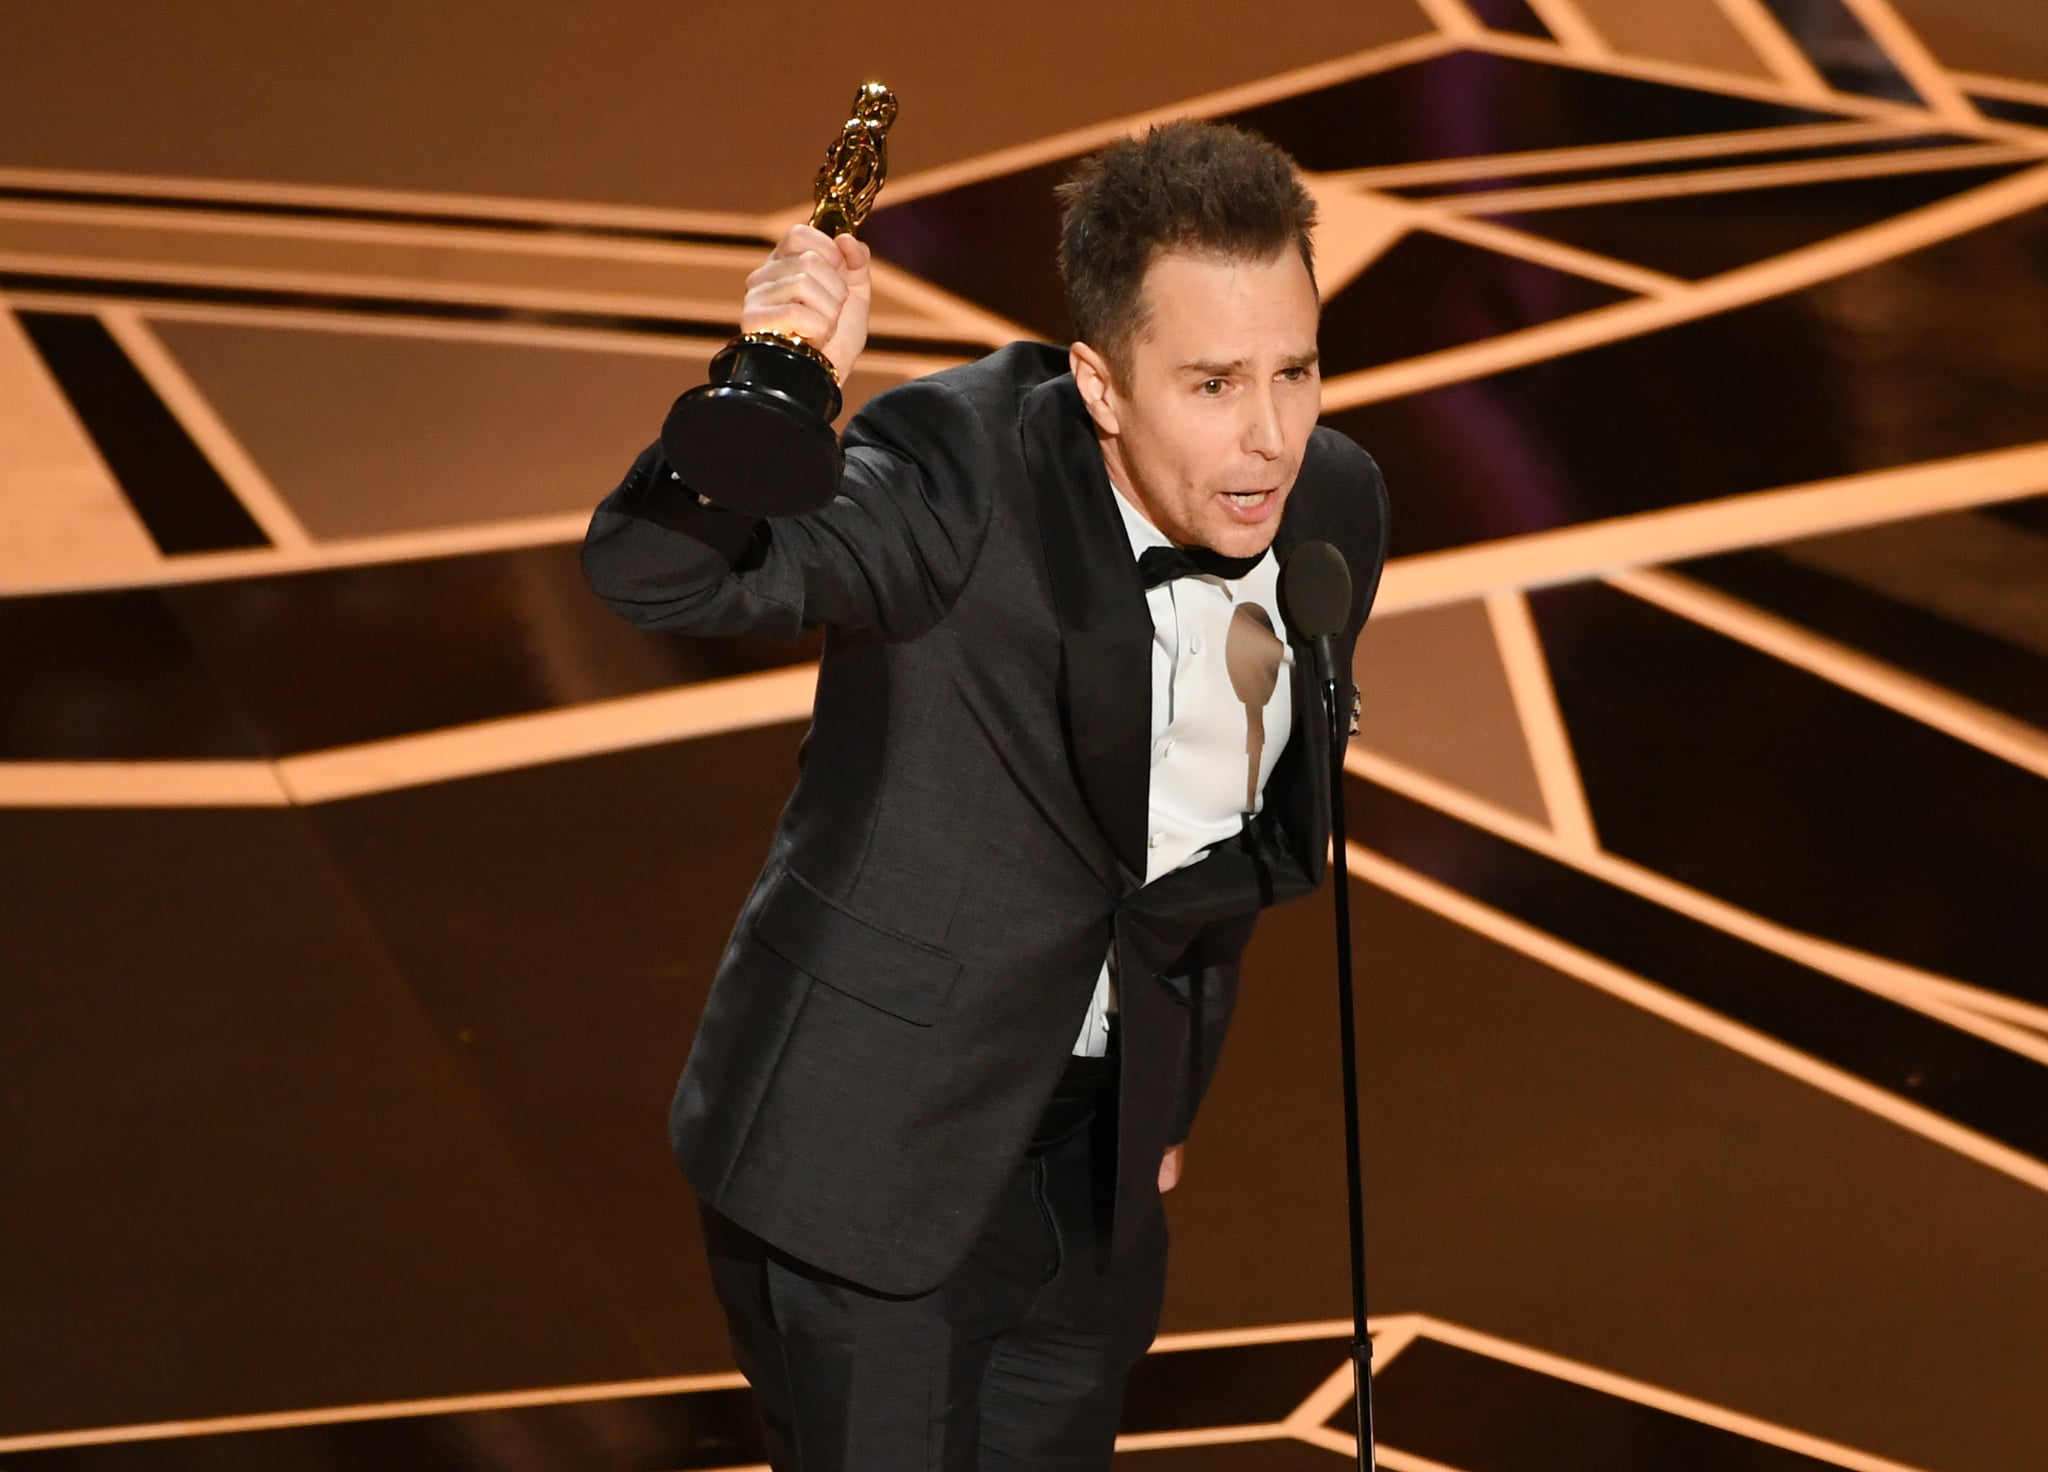 HOLLYWOOD, CA - MARCH 04:  Actor Sam Rockwell accepts Best Suppoorting Actor for 'Three Billboards Outside Ebbing, Missouri' onstage at the 90th Annual Academy Awards at the Dolby Theatre at Hollywood & Highland Center on March 4, 2018 in Hollywood, California.  (Photo by Kevin Winter/Getty Images)